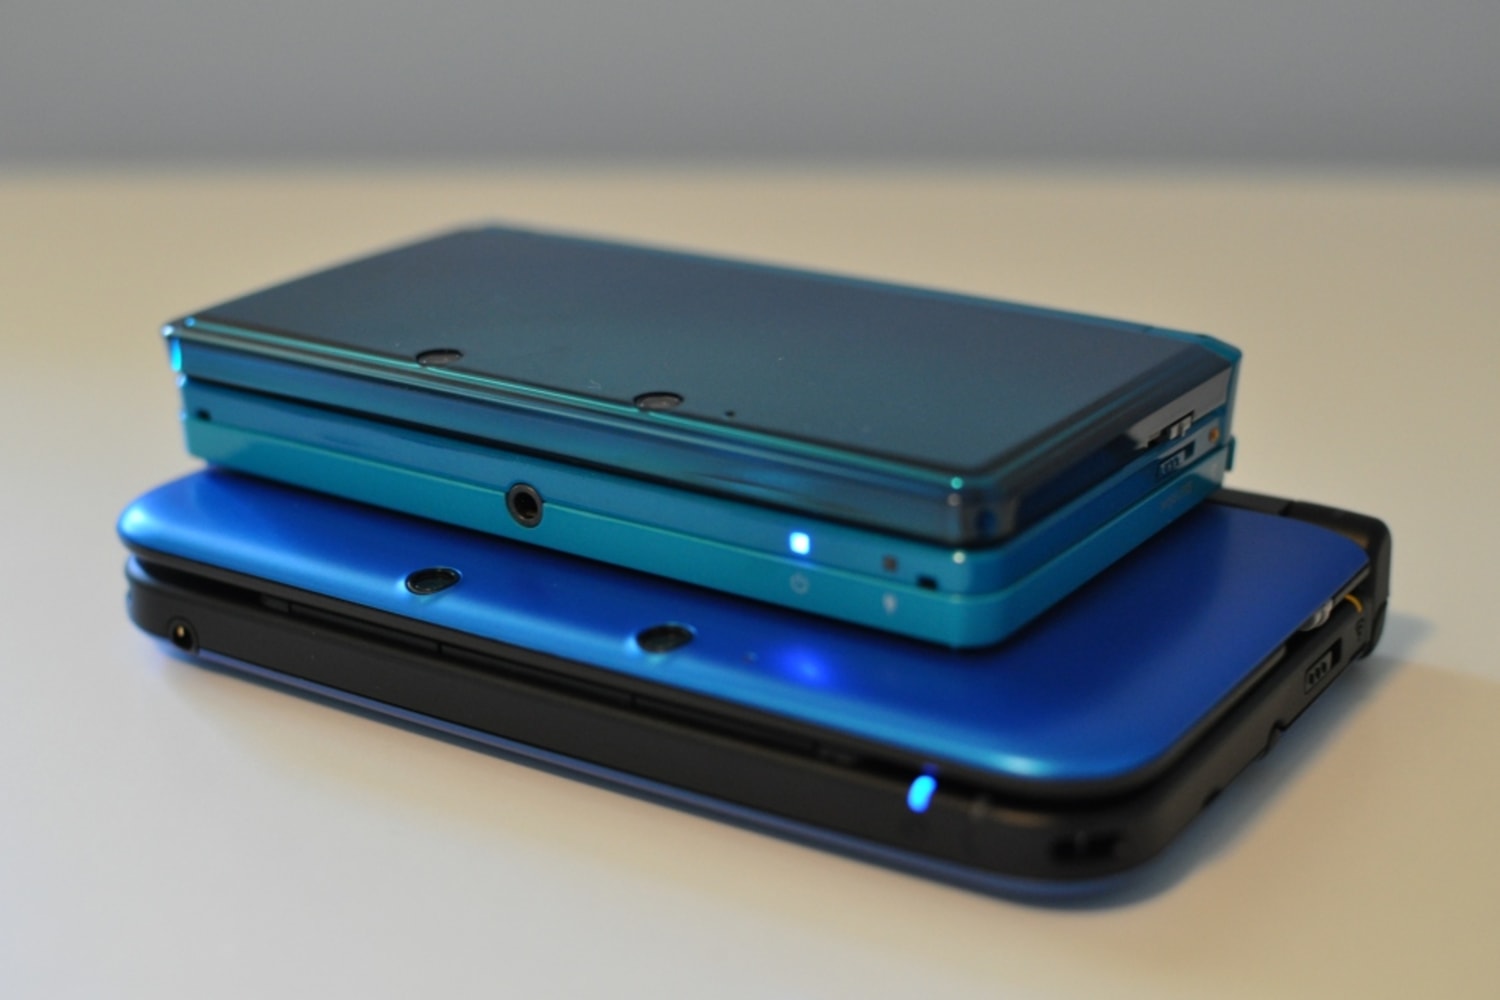 A Critical Look At The LAST & MOST EXPENSIVE Nintendo 3DS Game